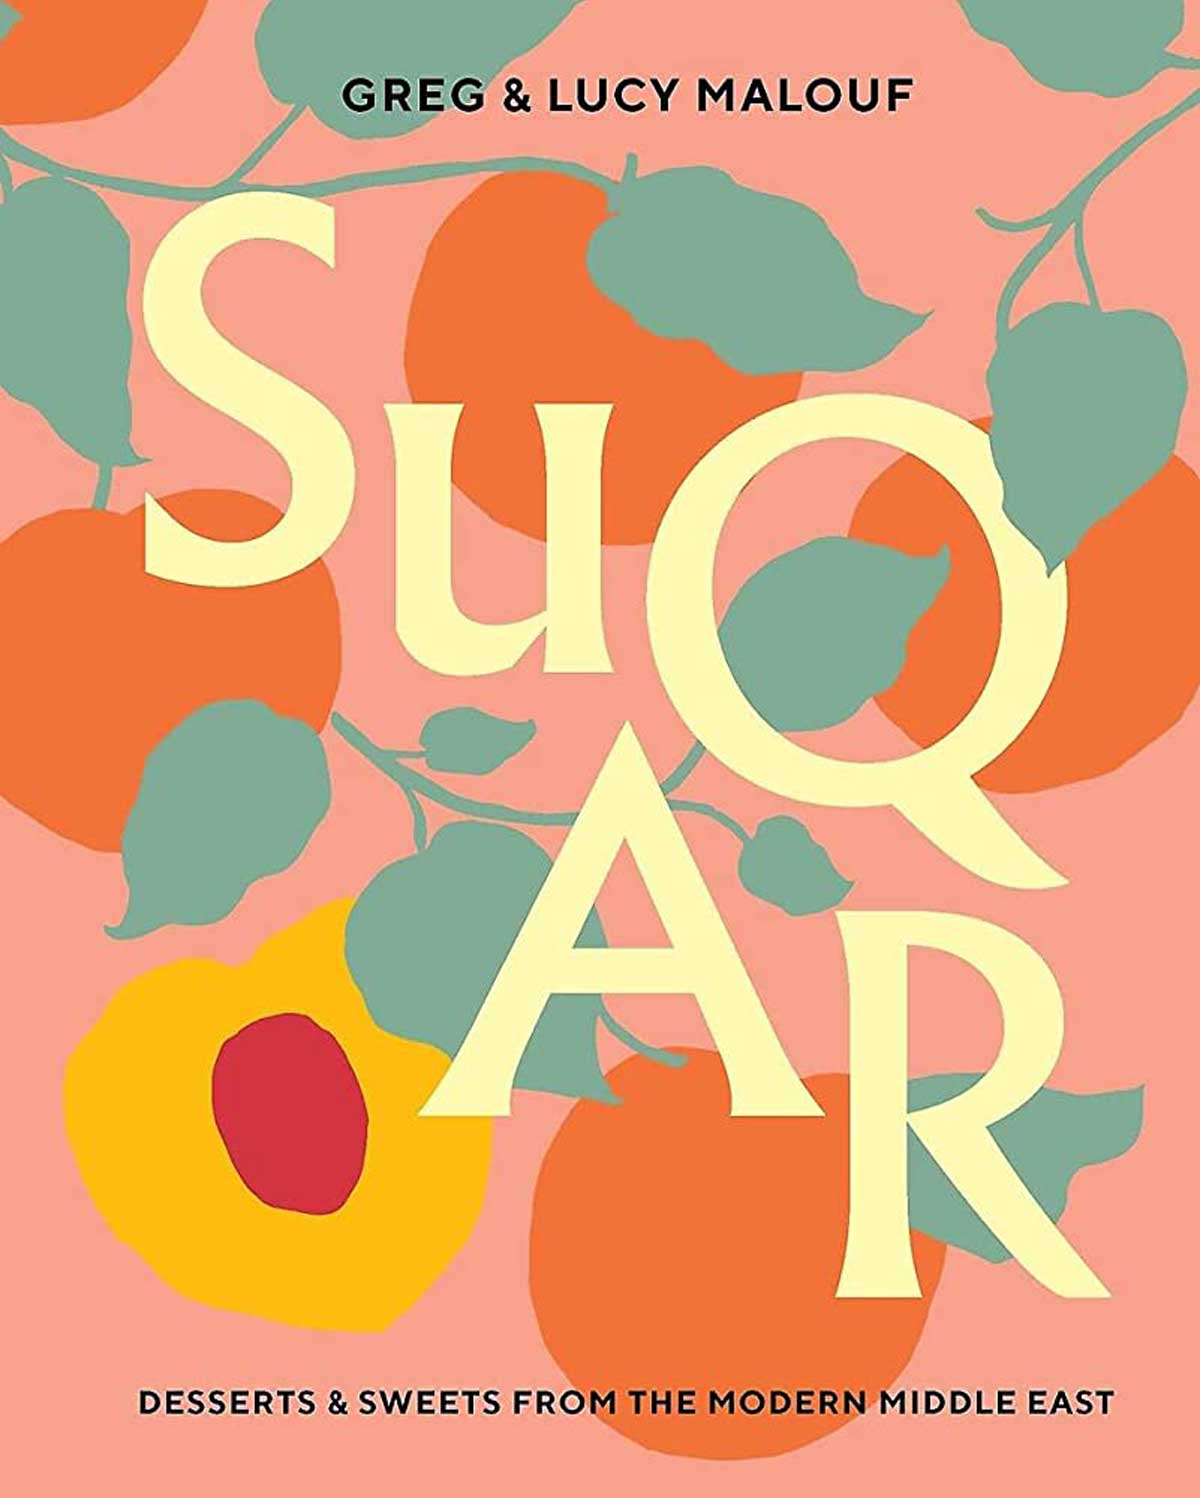 Suqar: desserts and sweets from the Middle East; By Greg Malouf and Lucy Malouf